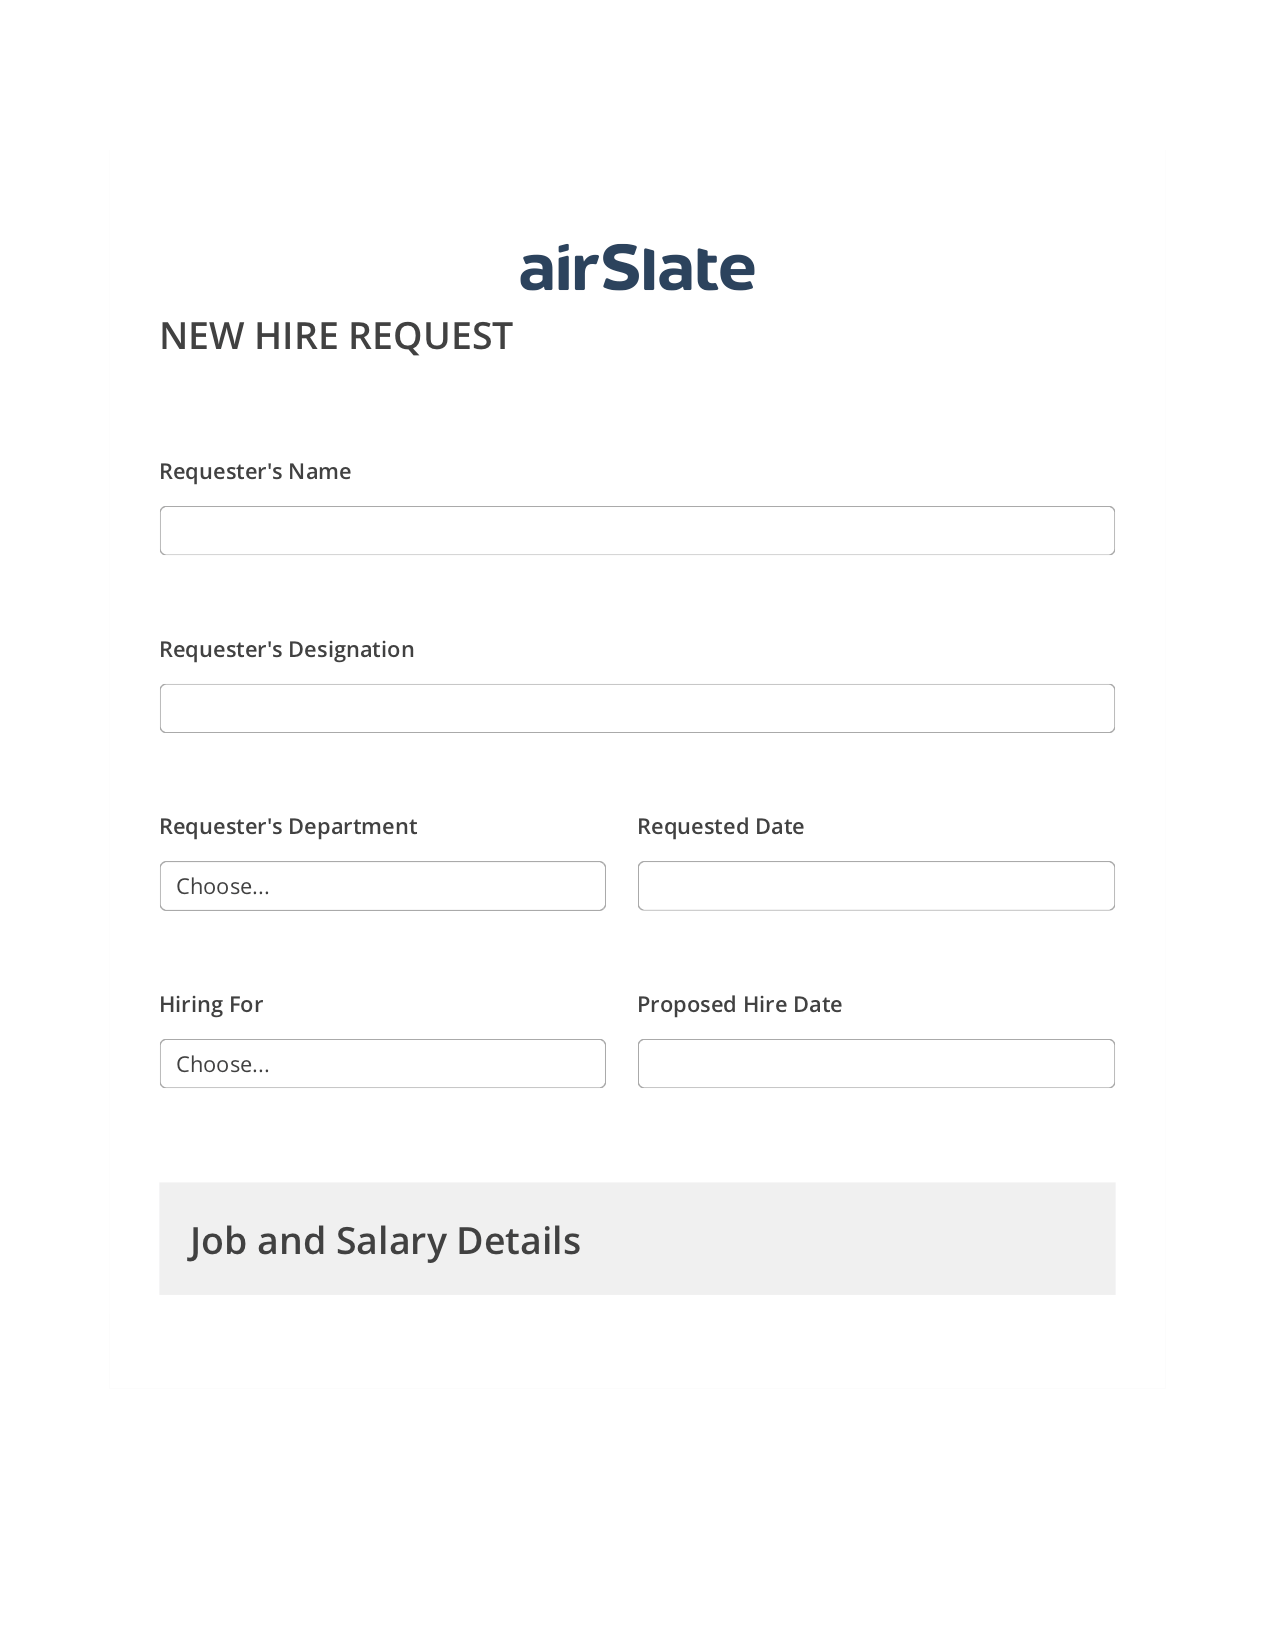 Hiring Request Workflow Pre-fill Document Bot, Roles Reminder Bot, Text Message Notification Postfinish Bot